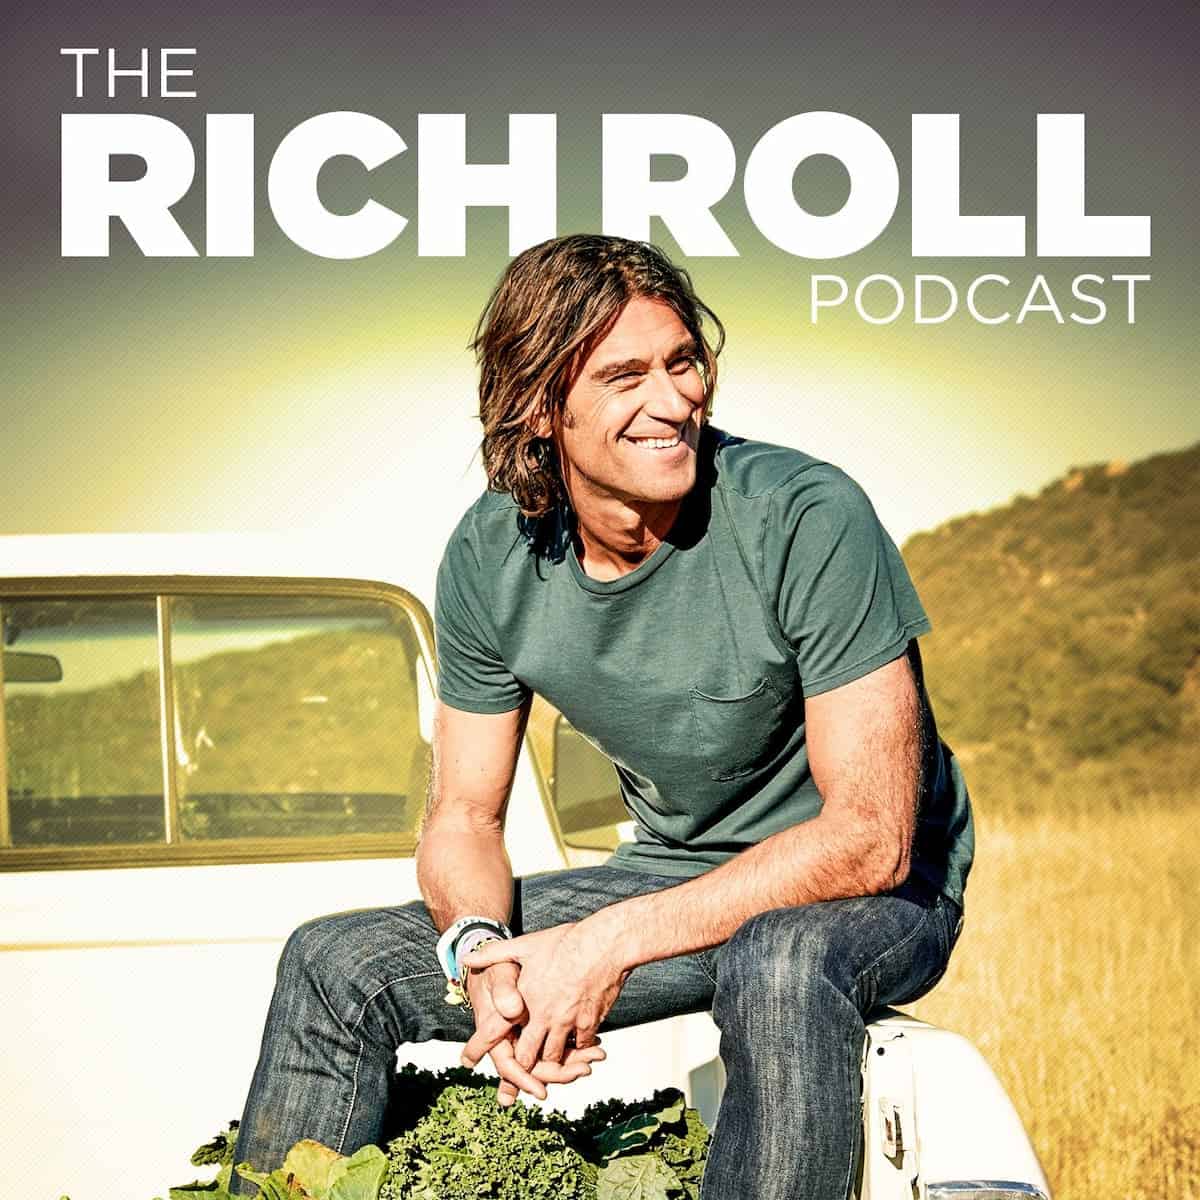 The Rich Roll Podcast cover art.